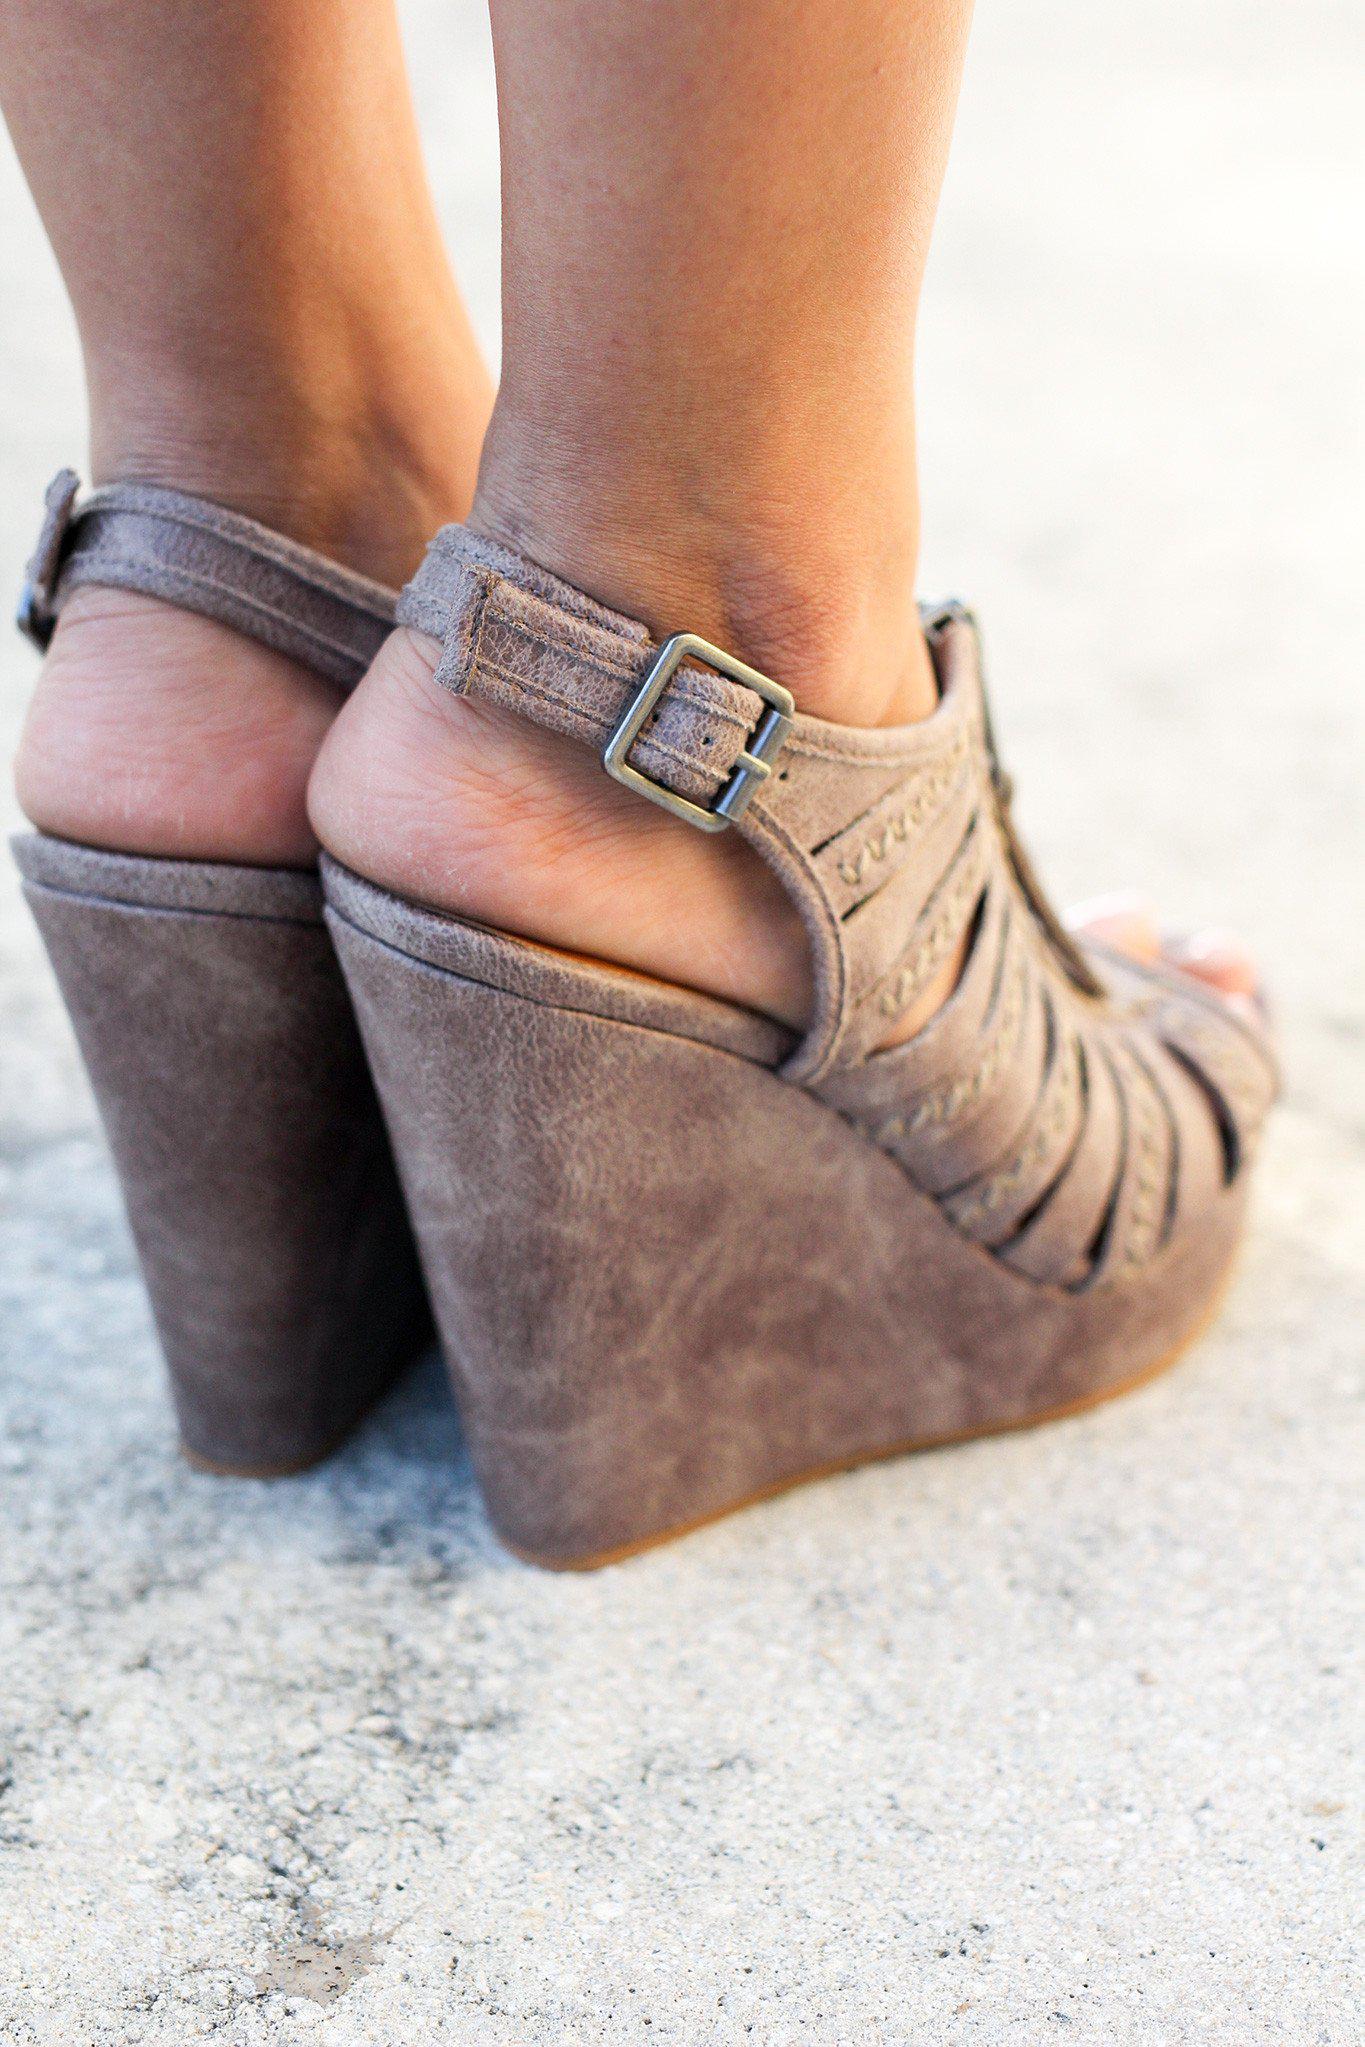 Wedges for Women